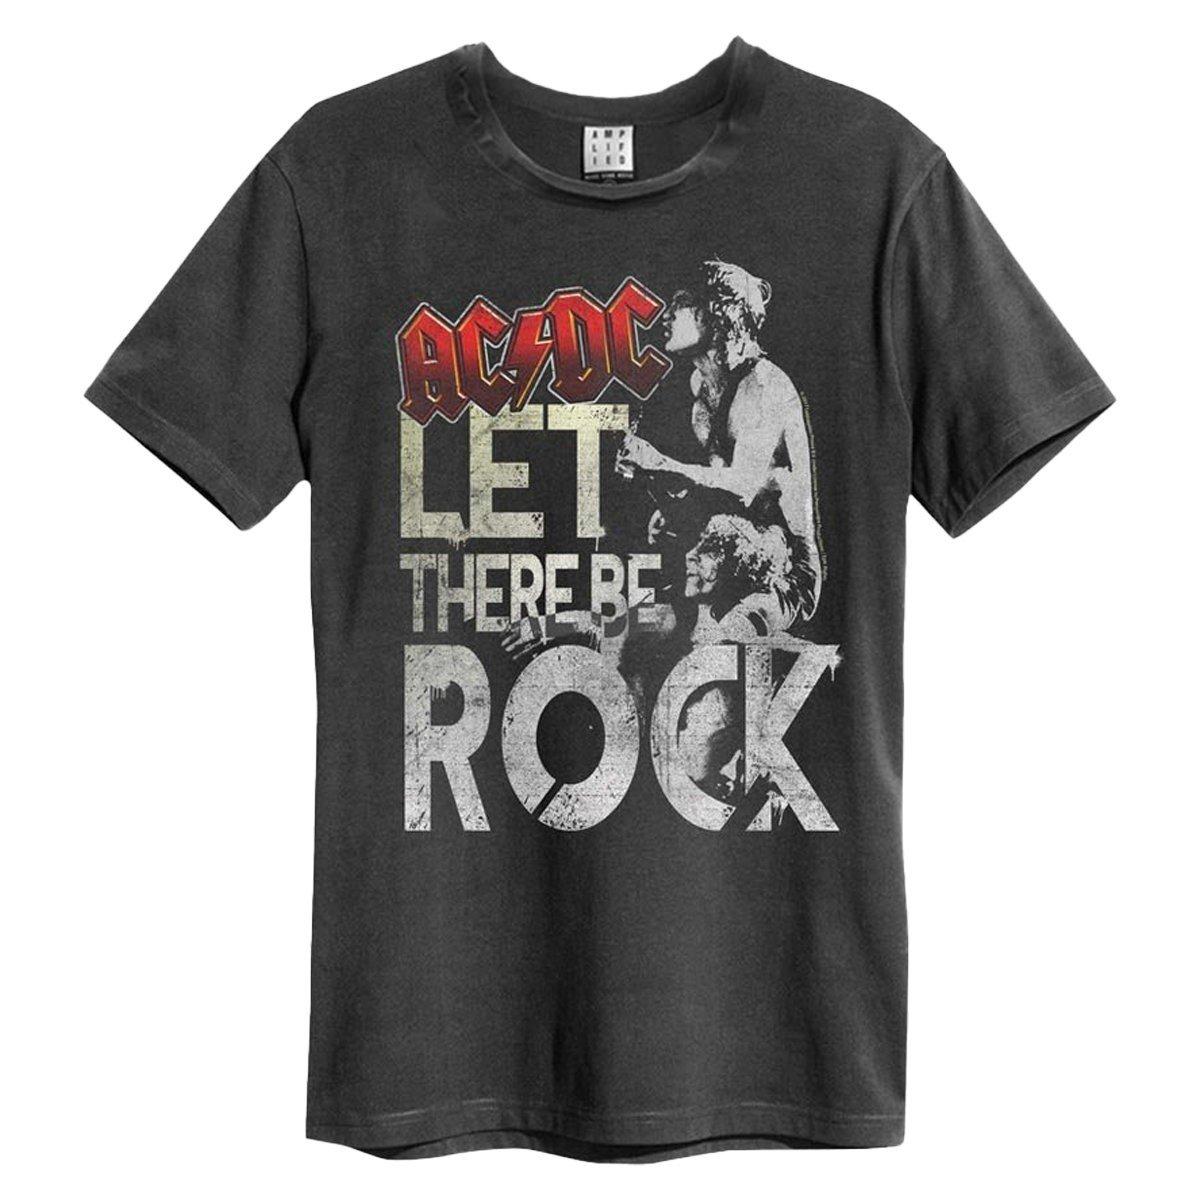 Let There Be Rock Tshirt Damen Charcoal Black XS von Amplified